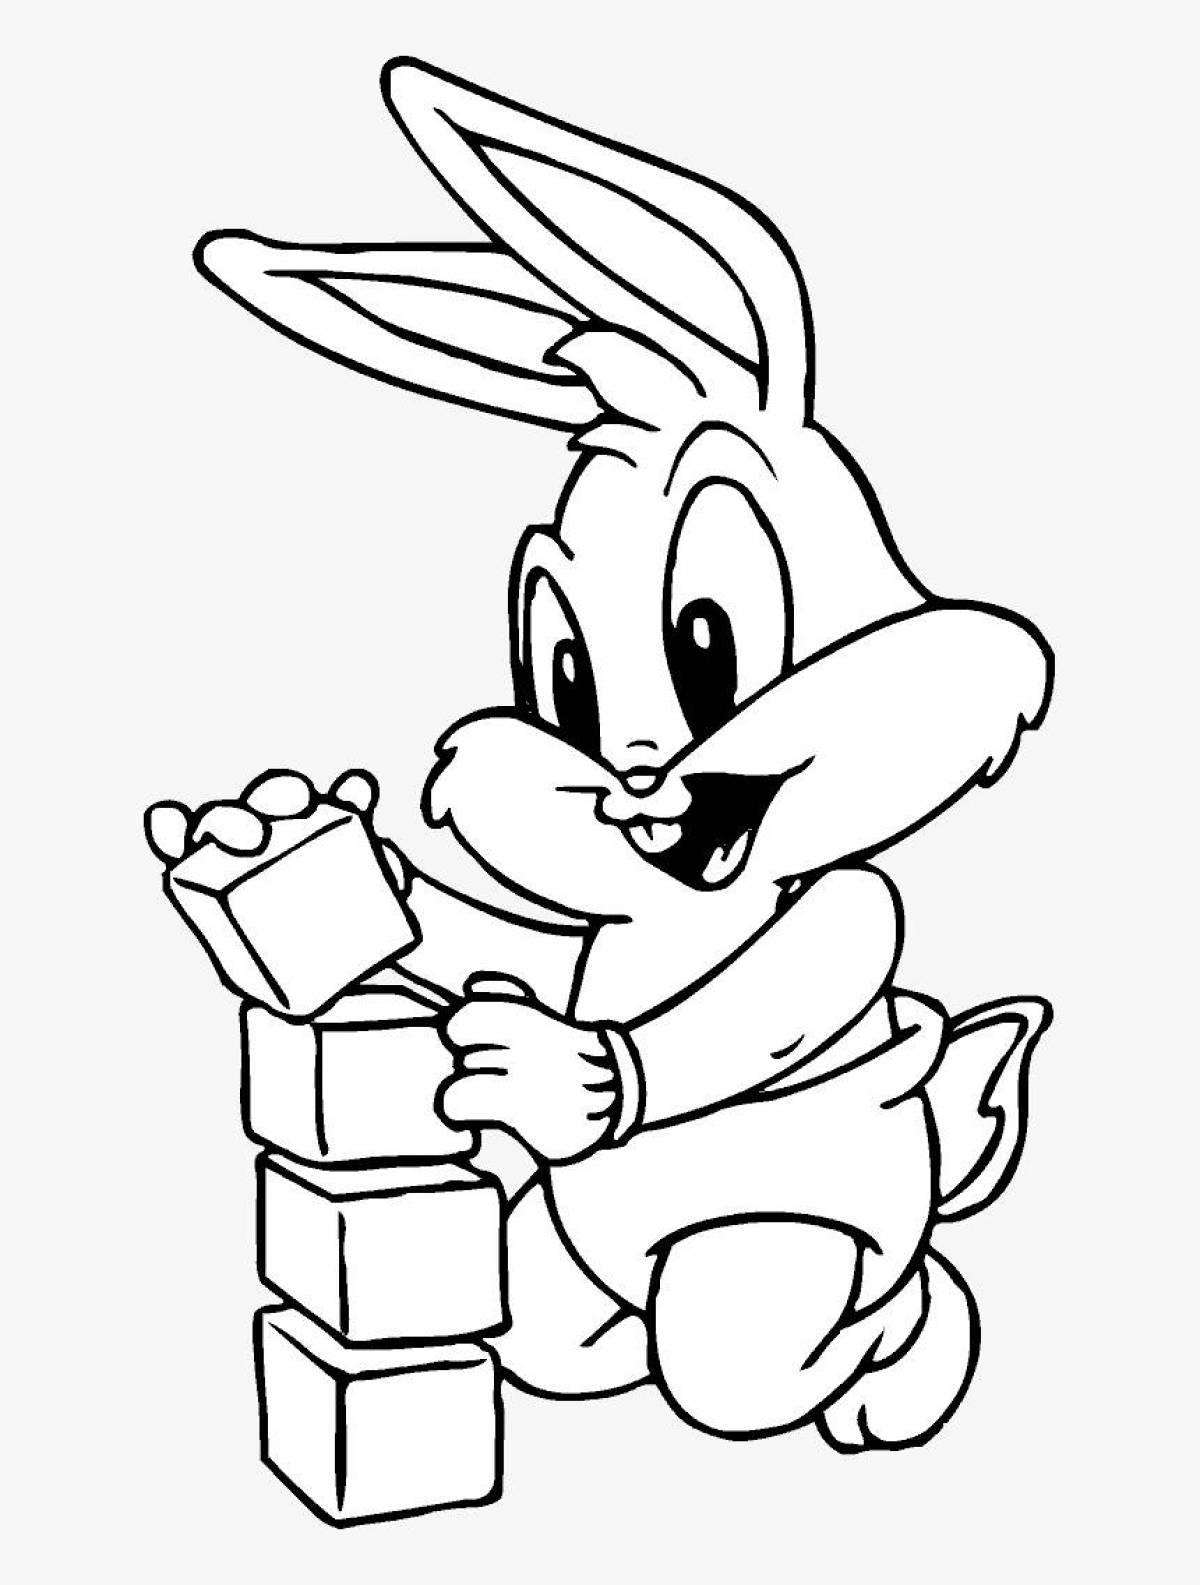 Great rabbit coloring pages for kids 3-4 years old